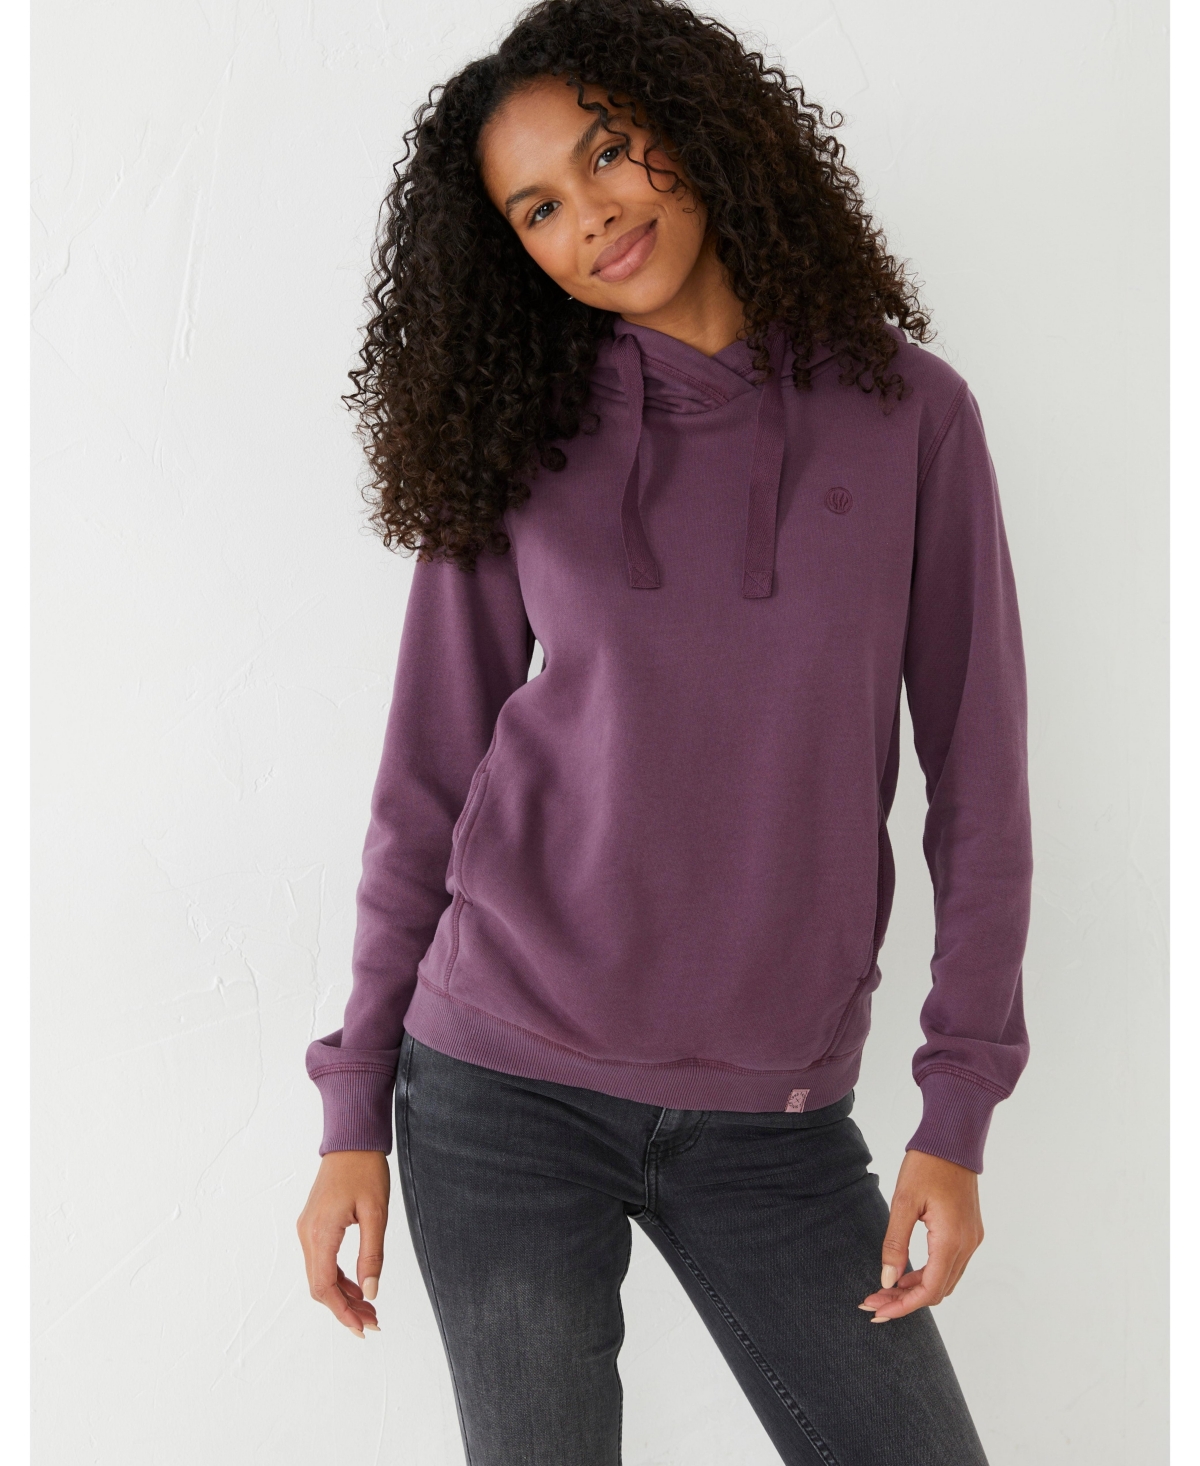 Fatface Isabelle Overhead Hoodie - Women's